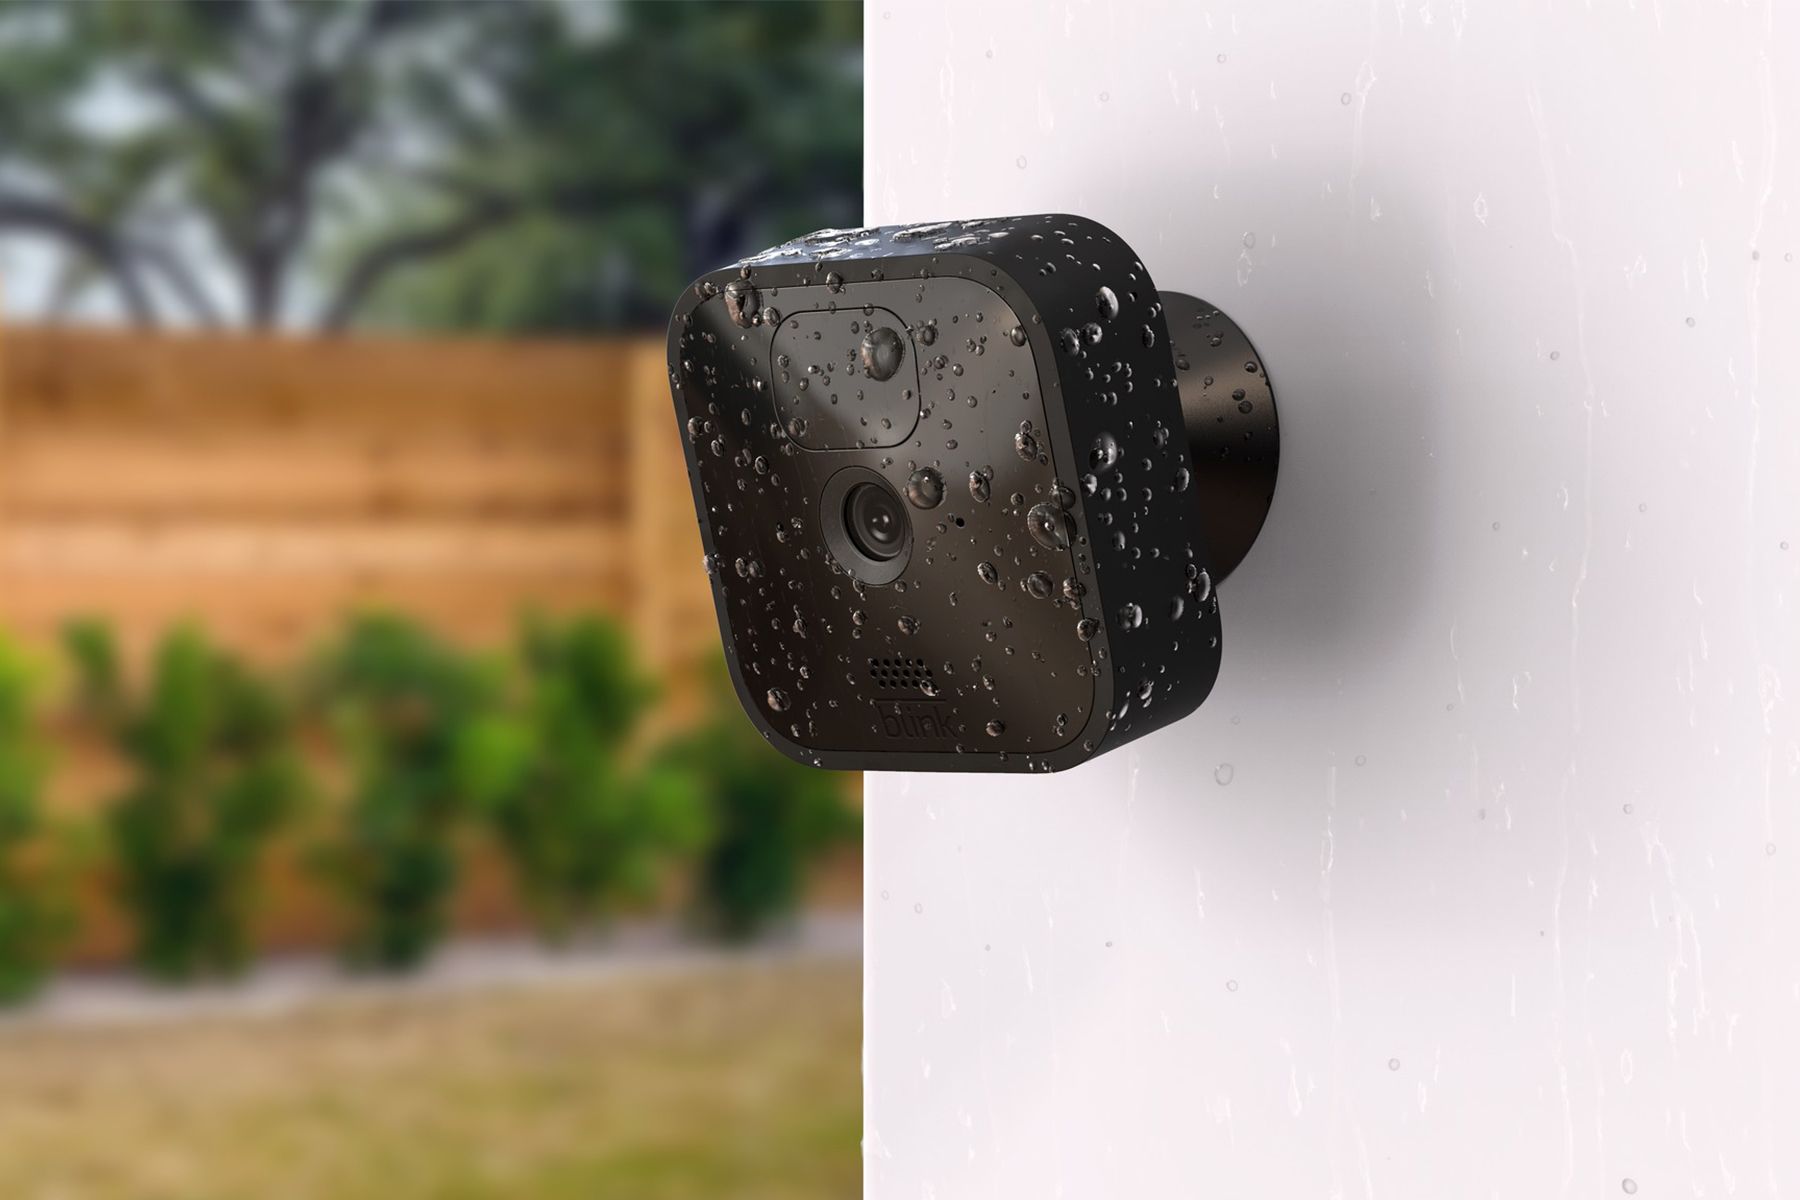 Shop 's Prime Day Sale on the Blink Outdoor Security Camera